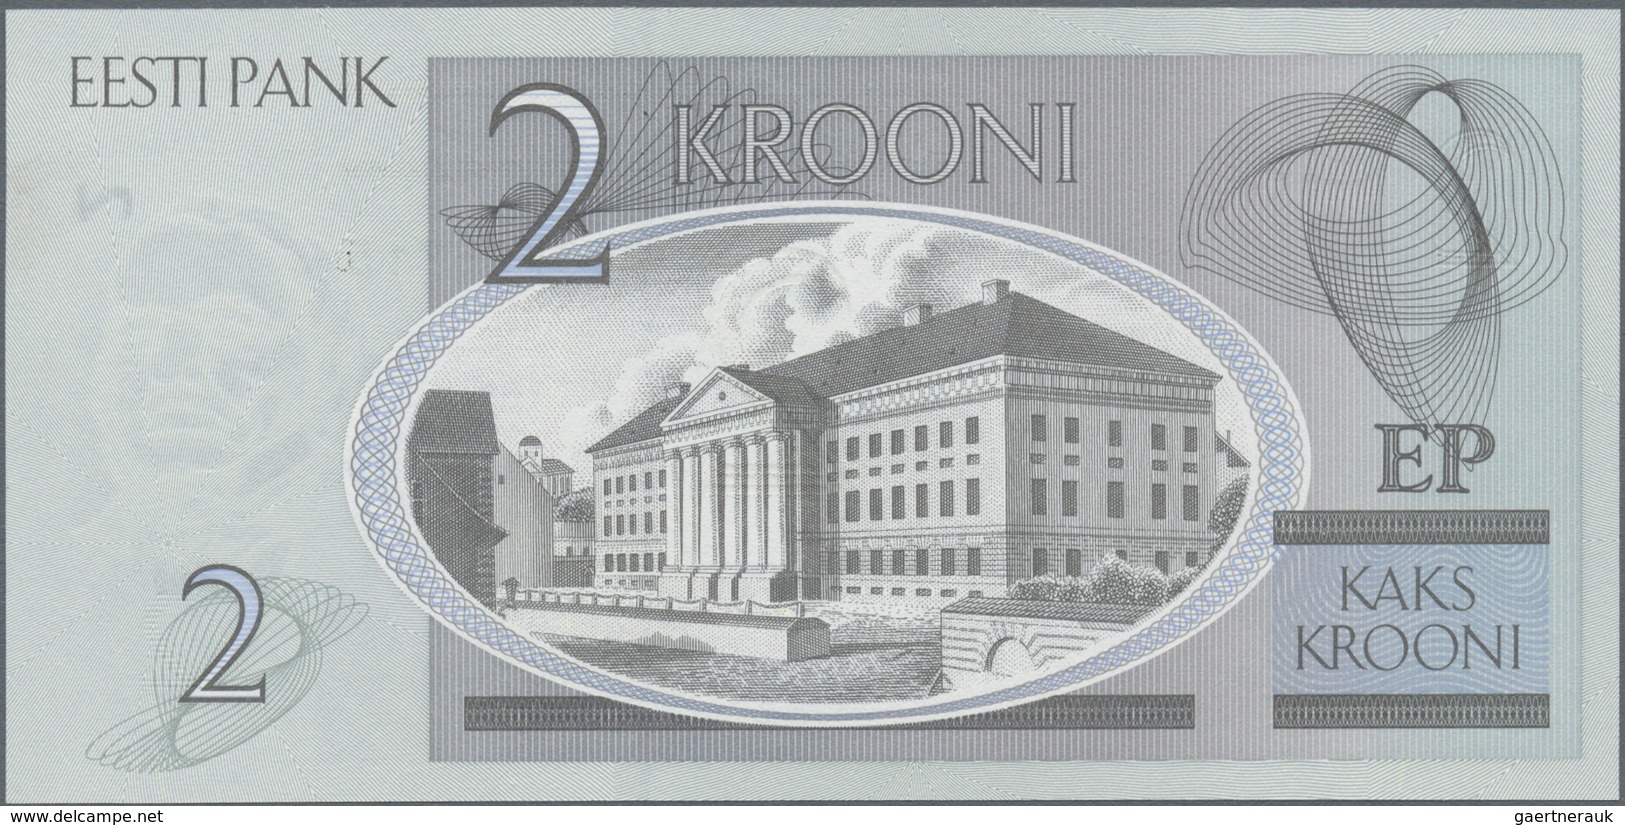 Estonia / Estland: Nice set with 8 Banknotes comprising 25 Krooni 2002 replacement note series "ZZ",